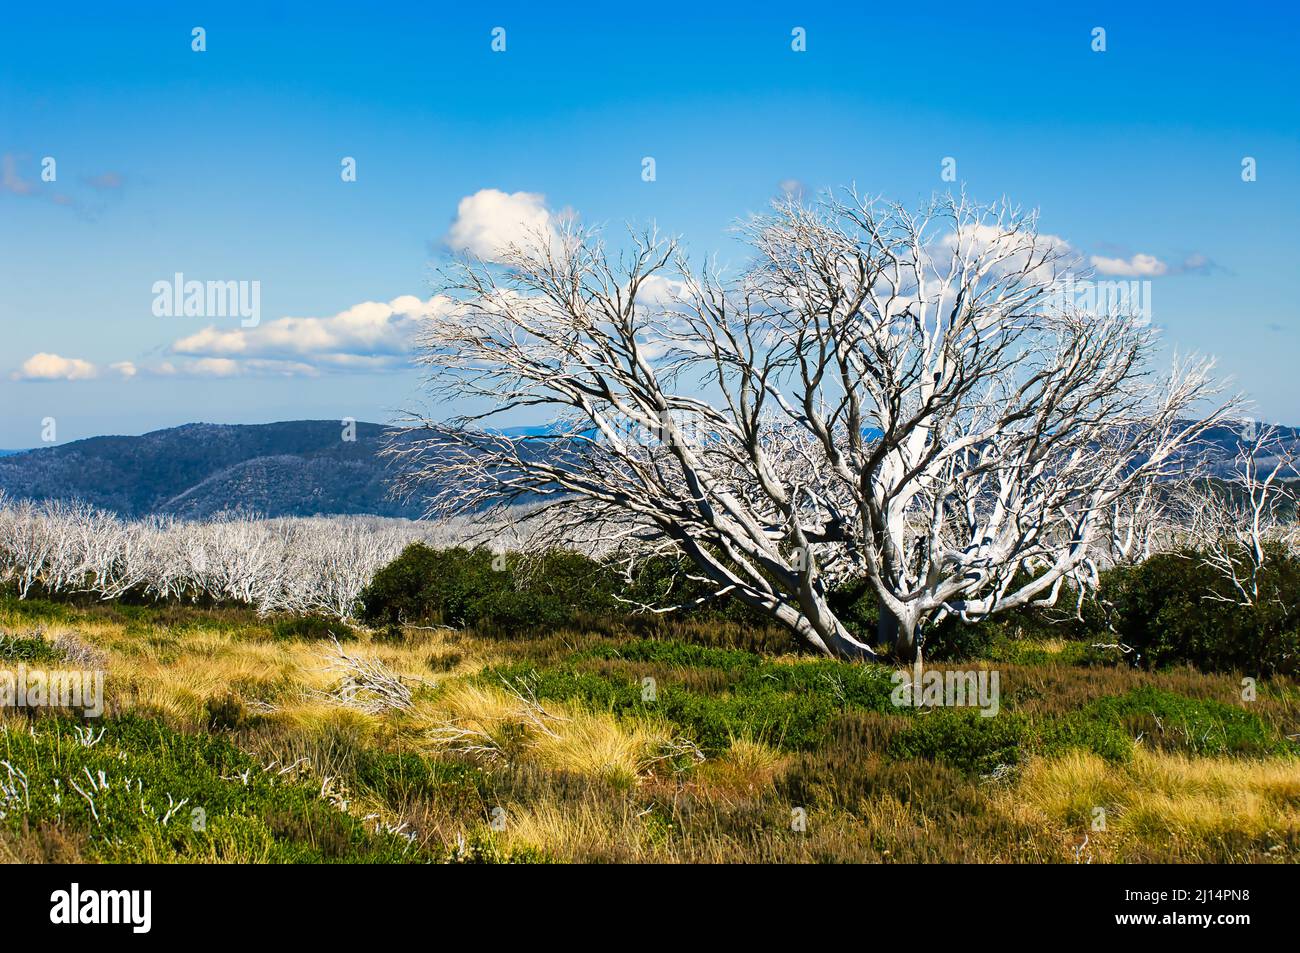 Australian mountain forest, a few years after a devastating wildfire. Dead trees bleached white. Bogong High Plains, Victoria, Australia. Stock Photo